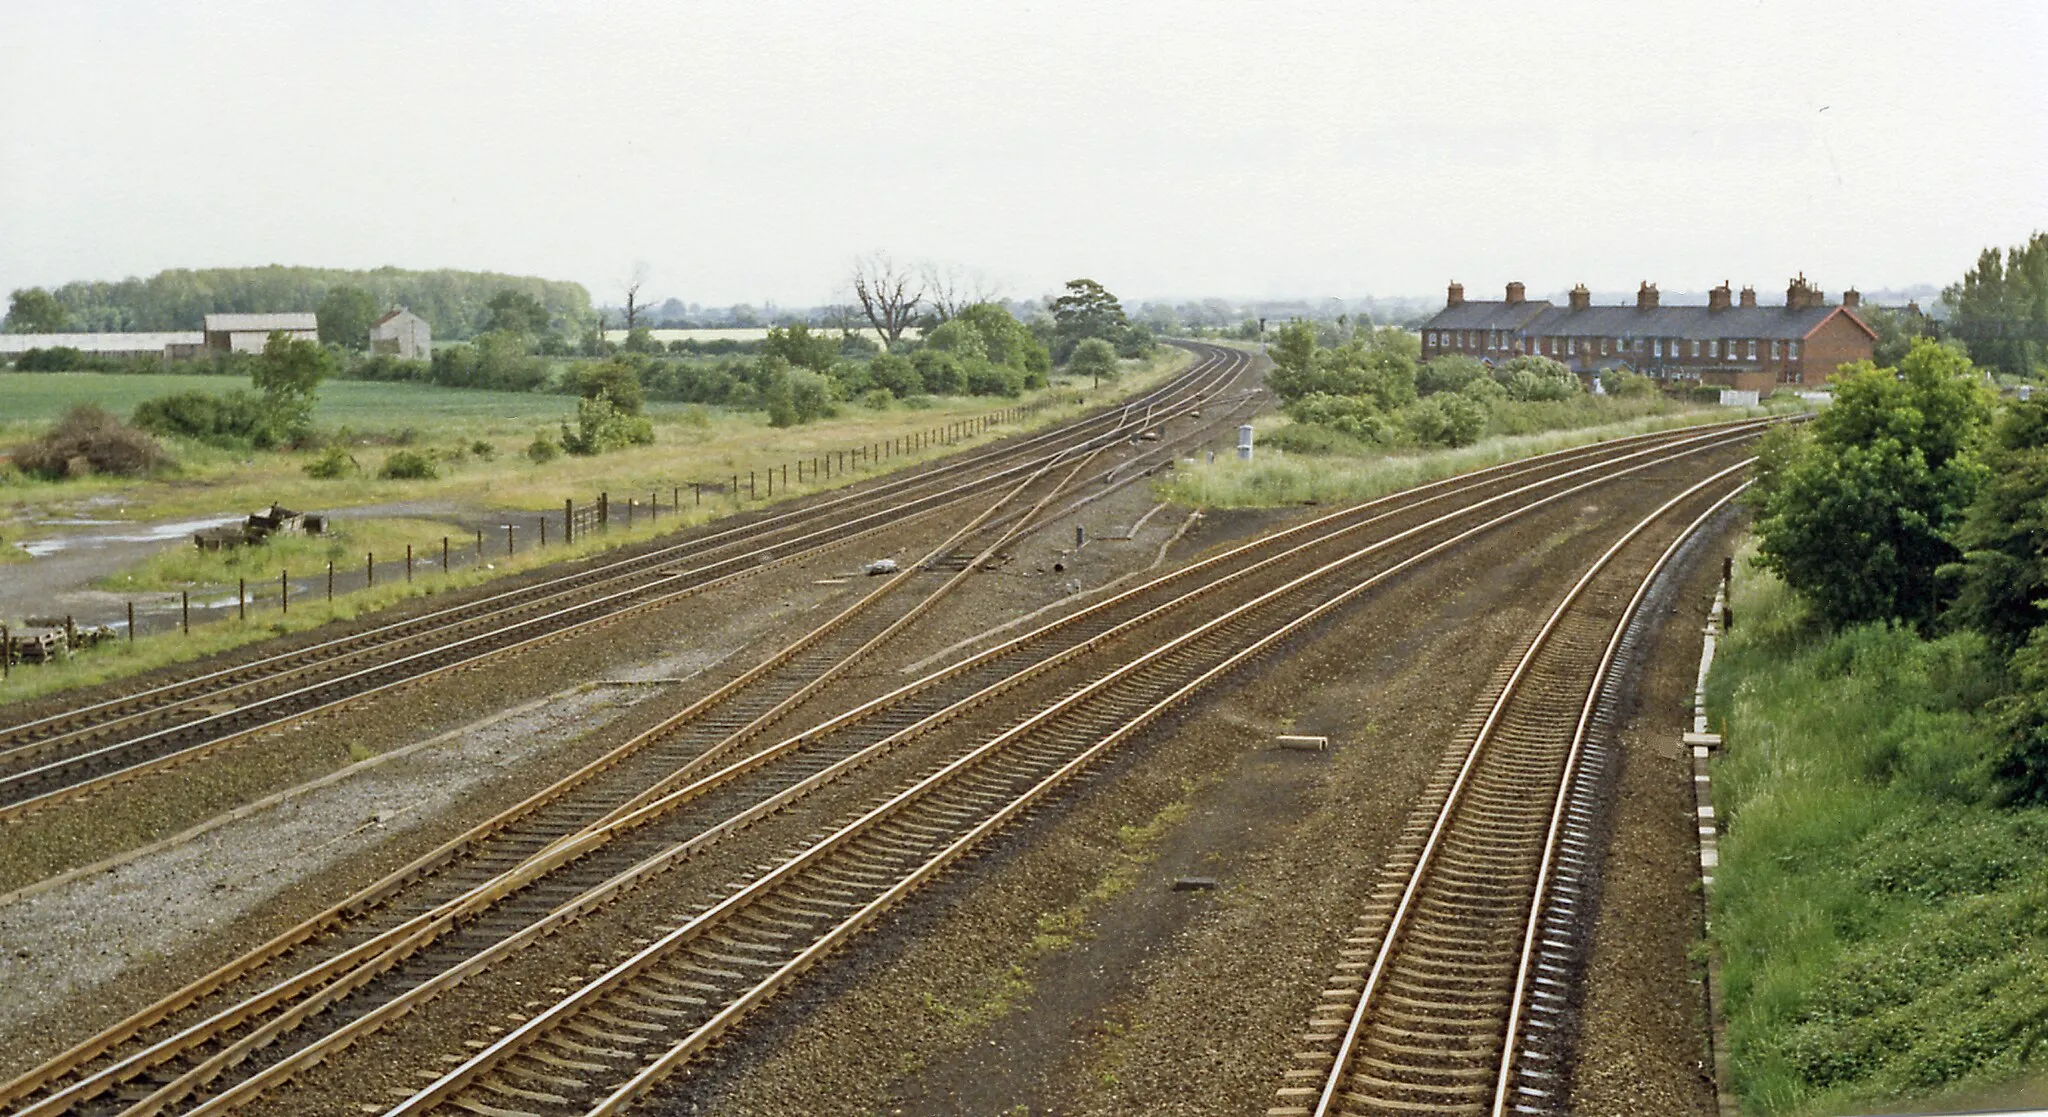 Photo showing: Main lines running south from Church Fenton.
View southward from bridge at the south end of Church Fenton station: ex-NER major junction of main lines from York, and from Harrogate via Wetherby, to Sheffield via Pontefract (to the left) and to Leeds (to the right).